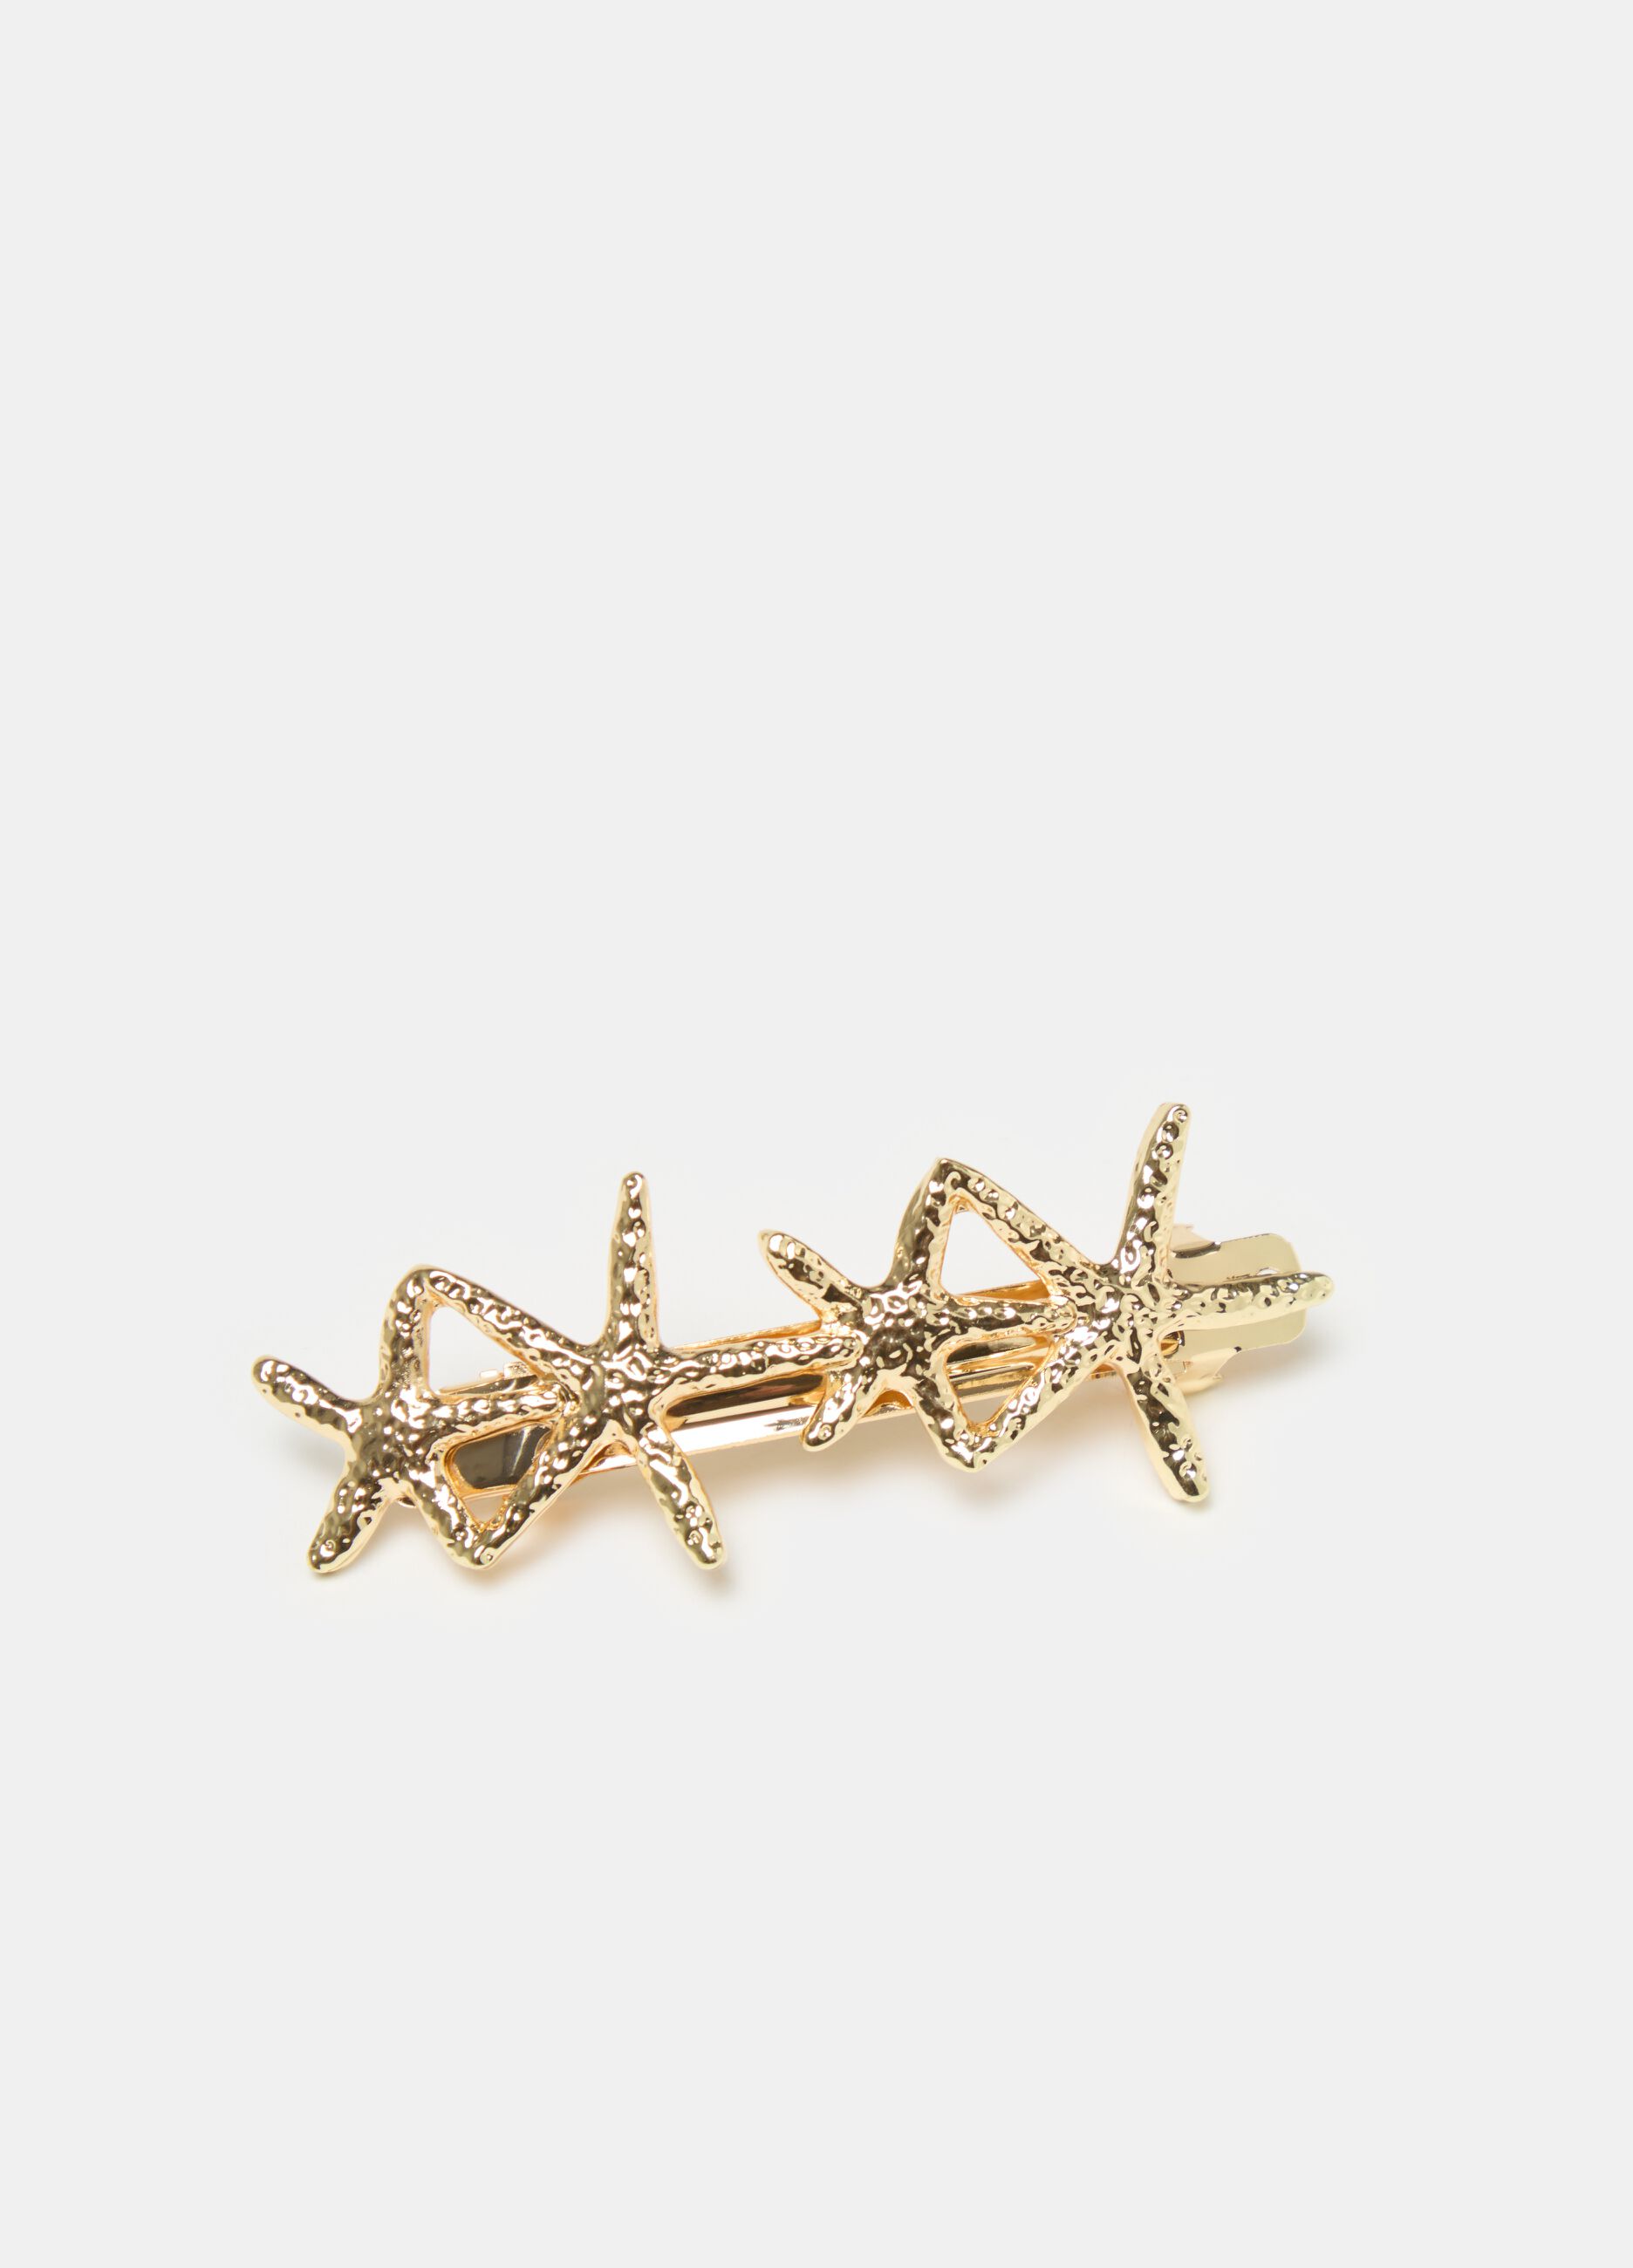 Hair clip with star fish